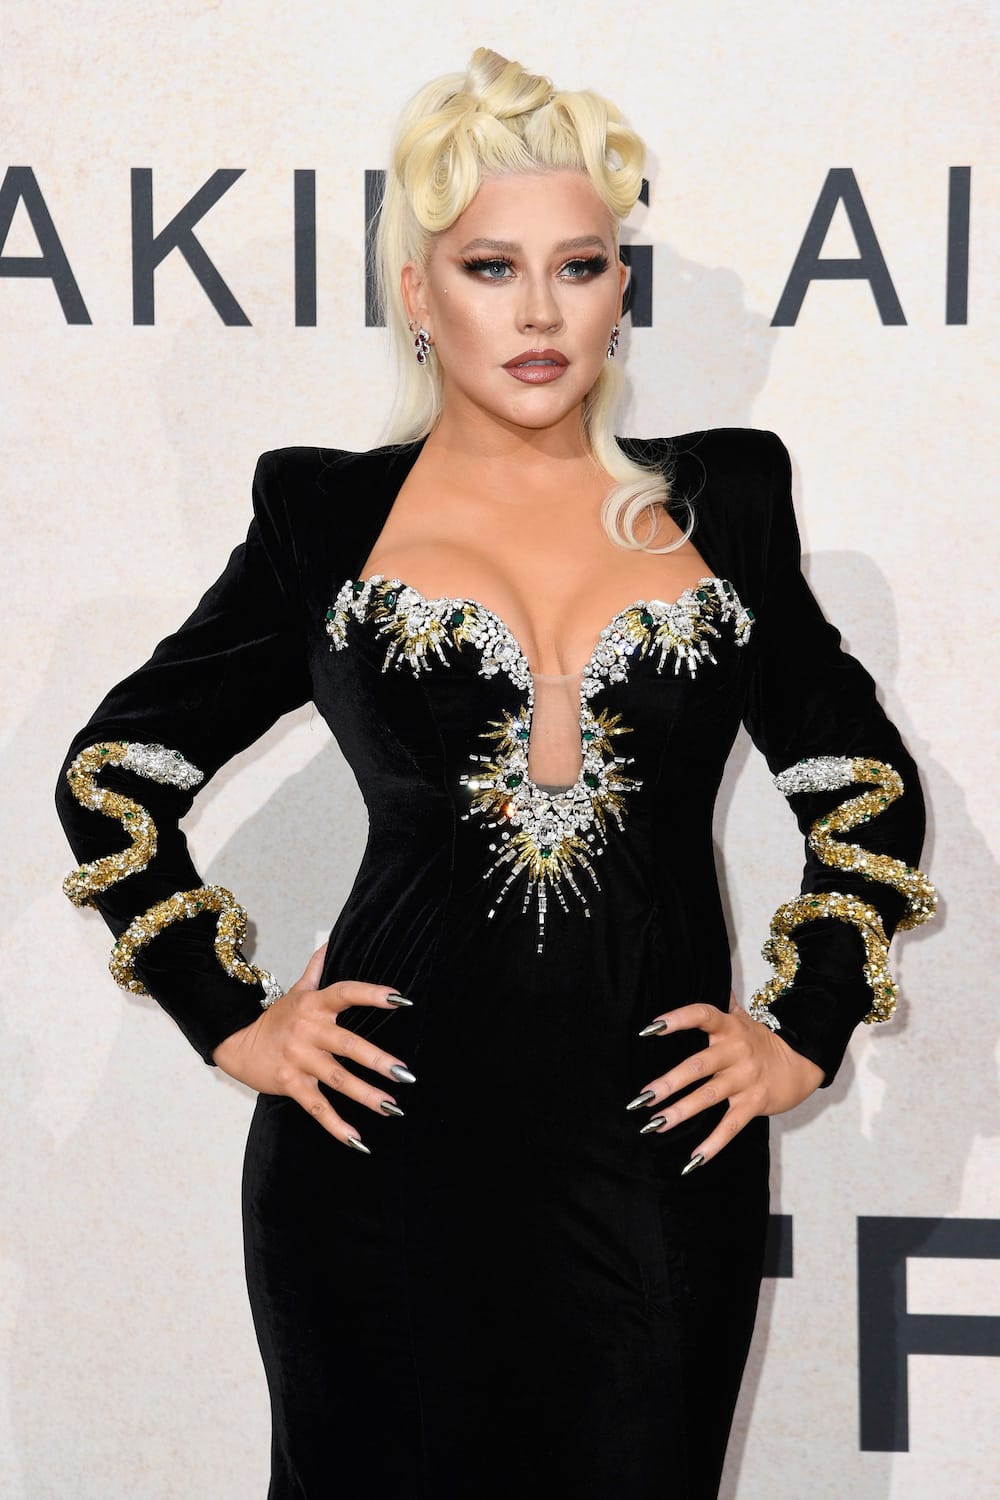 Christina Aguilera wowed on the red carpet before performing at the 28th amfAR Gala during the 2022 Cannes Film Festival at the Hotel du Cap-Eden-Roc on Thursday (May 26) in Cap d’Antibes, France.